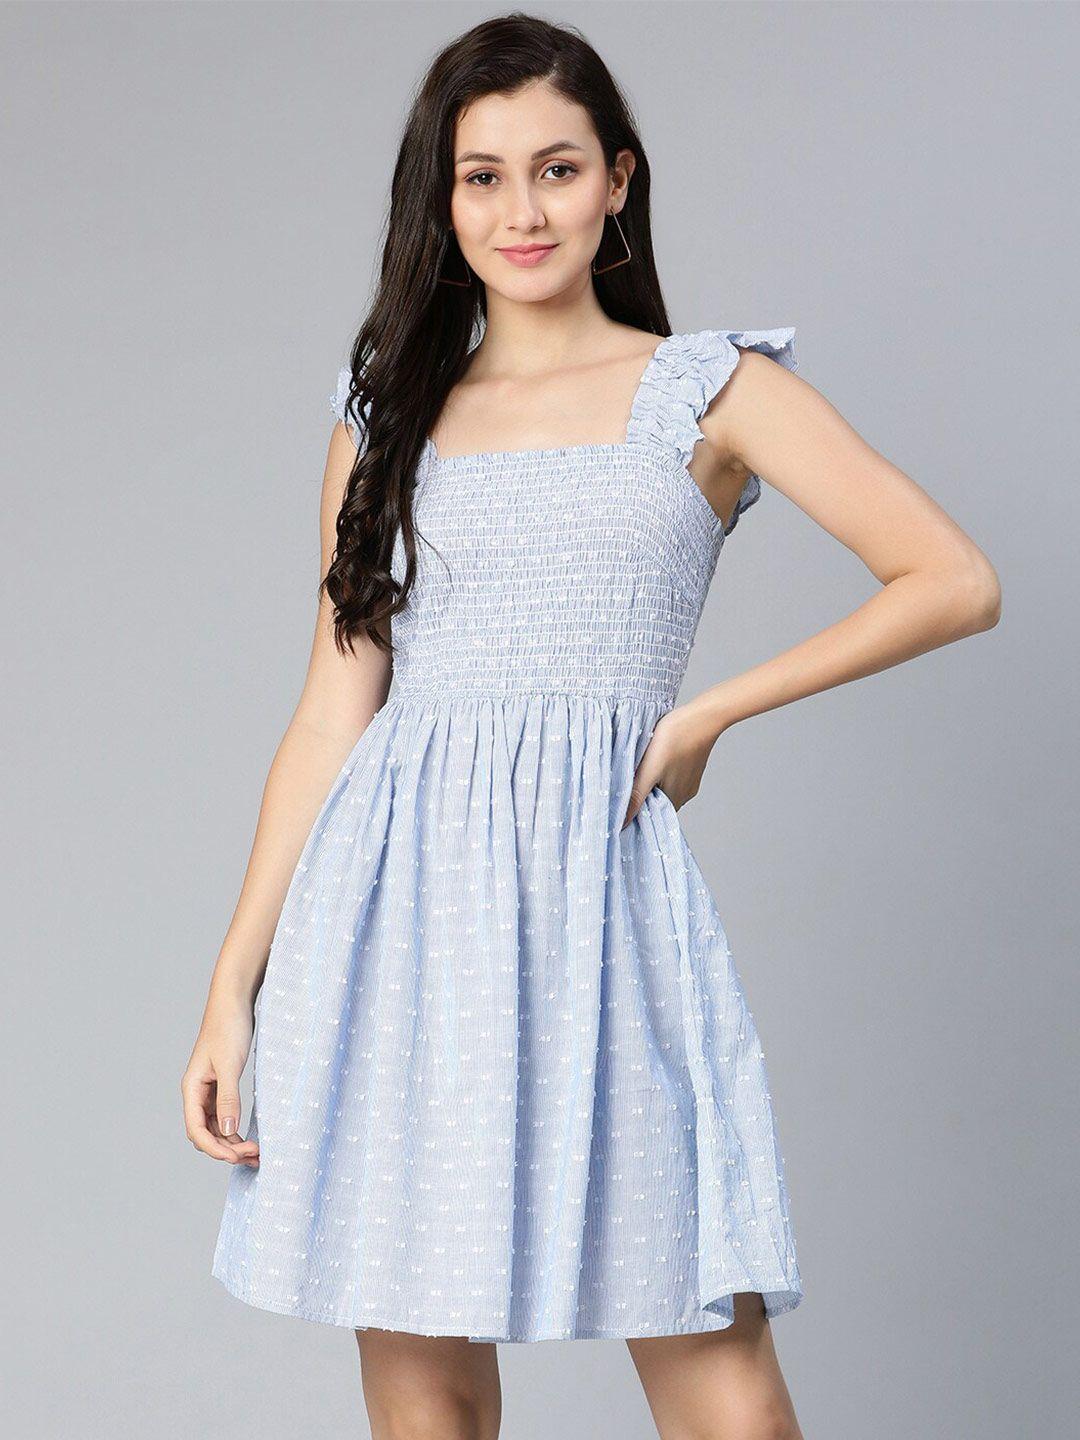 oxolloxo women blue floral striped printed smocked dress